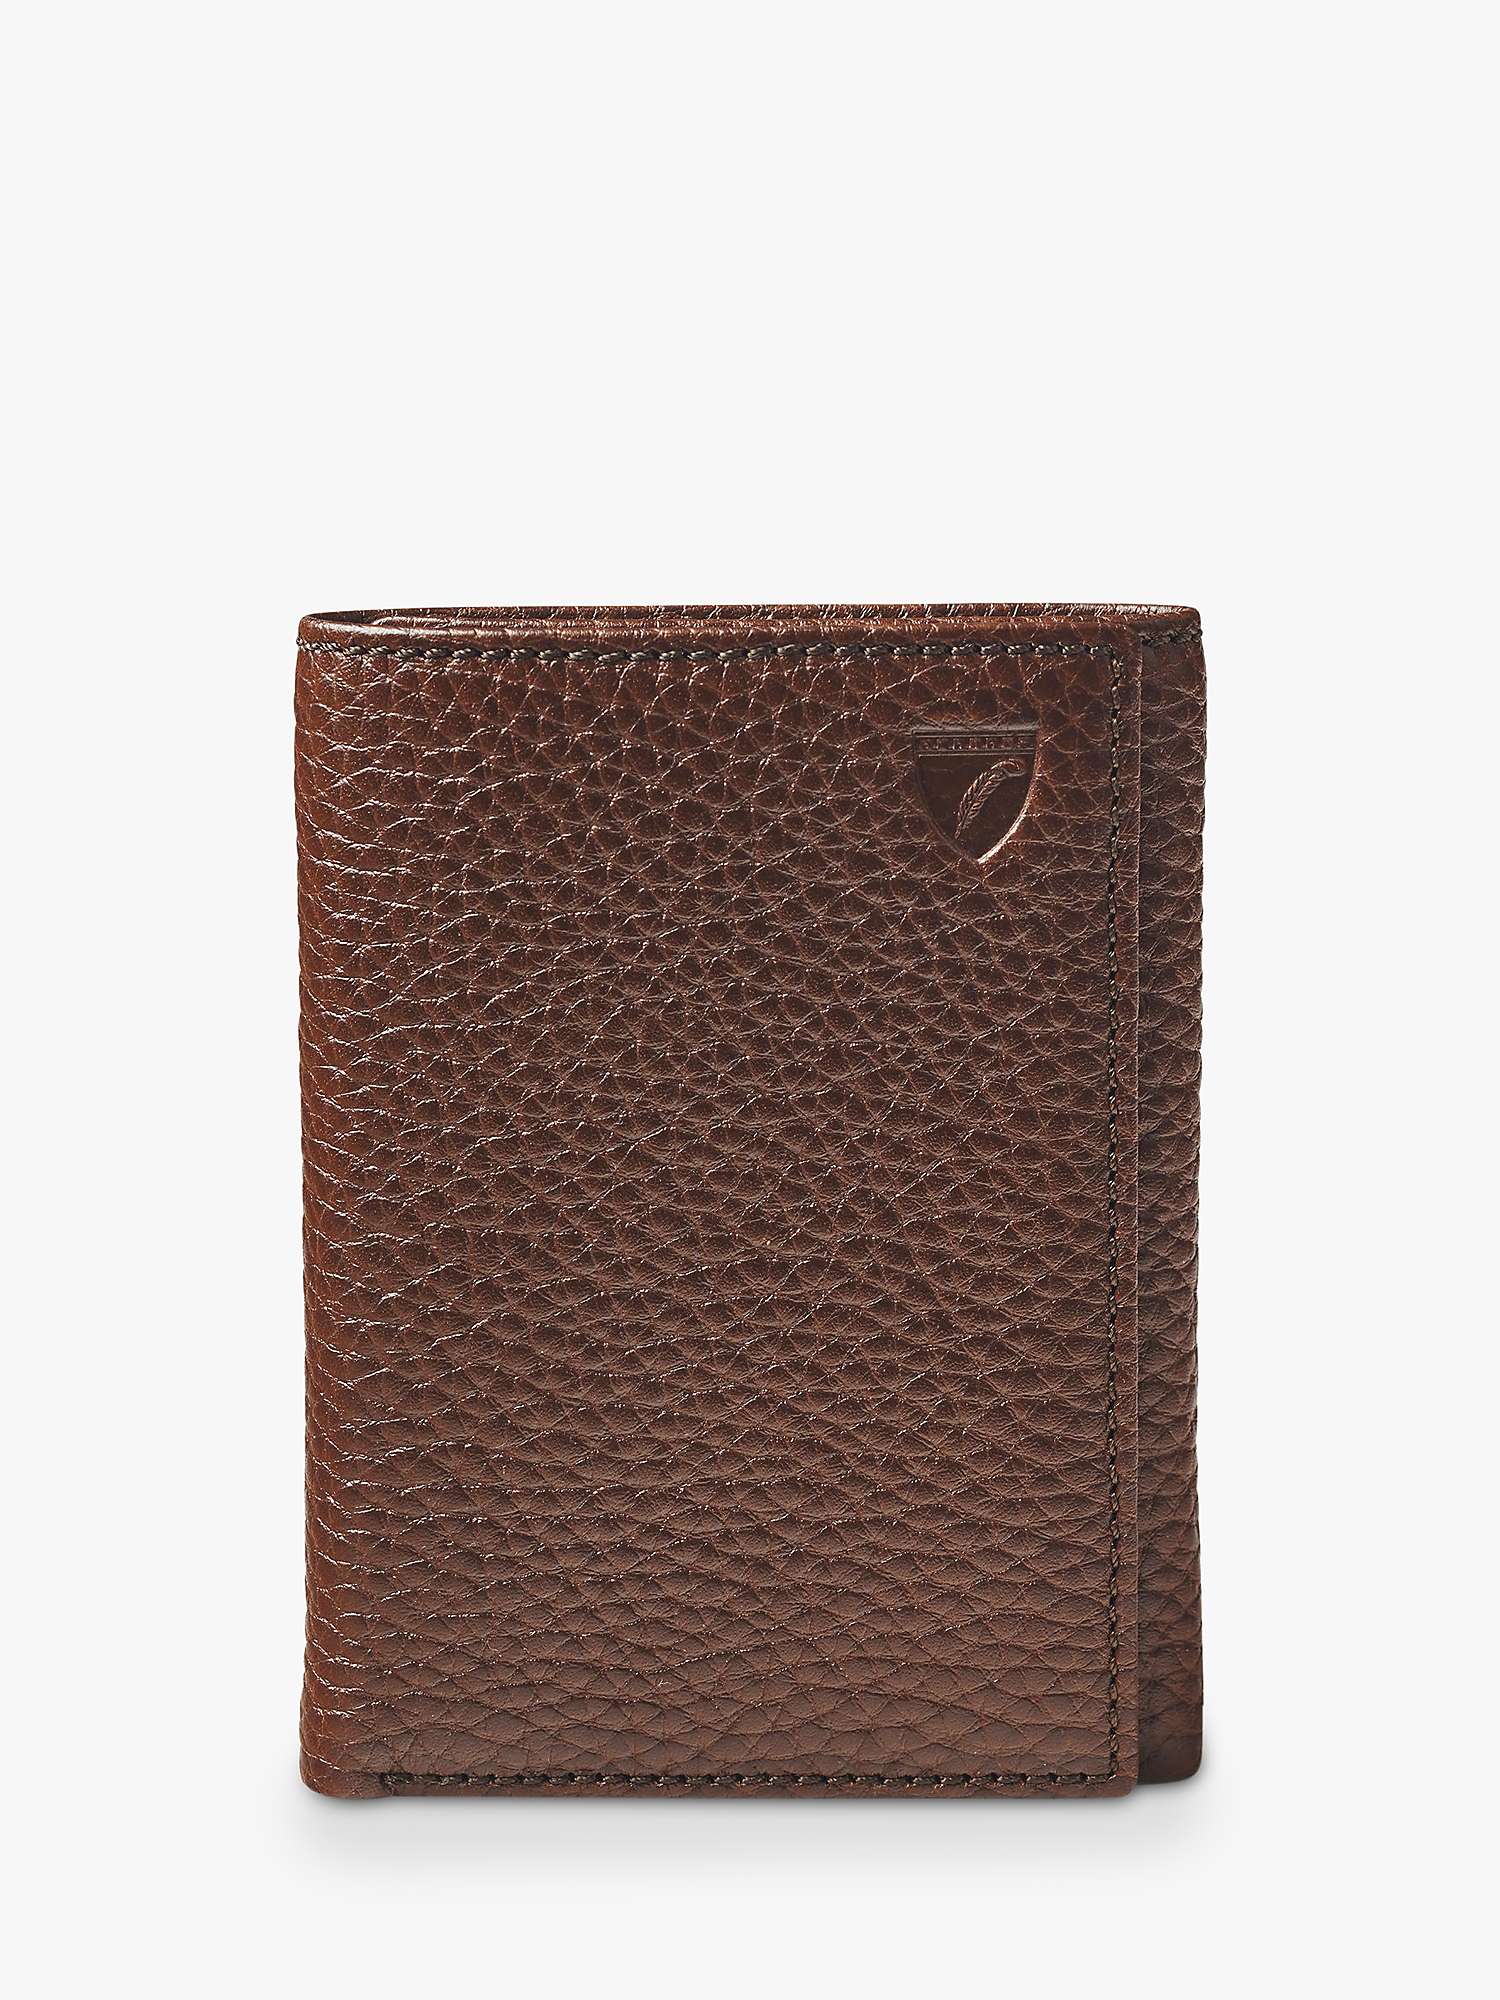 Buy Aspinal of London Pebble Leather Trifold Wallet Online at johnlewis.com